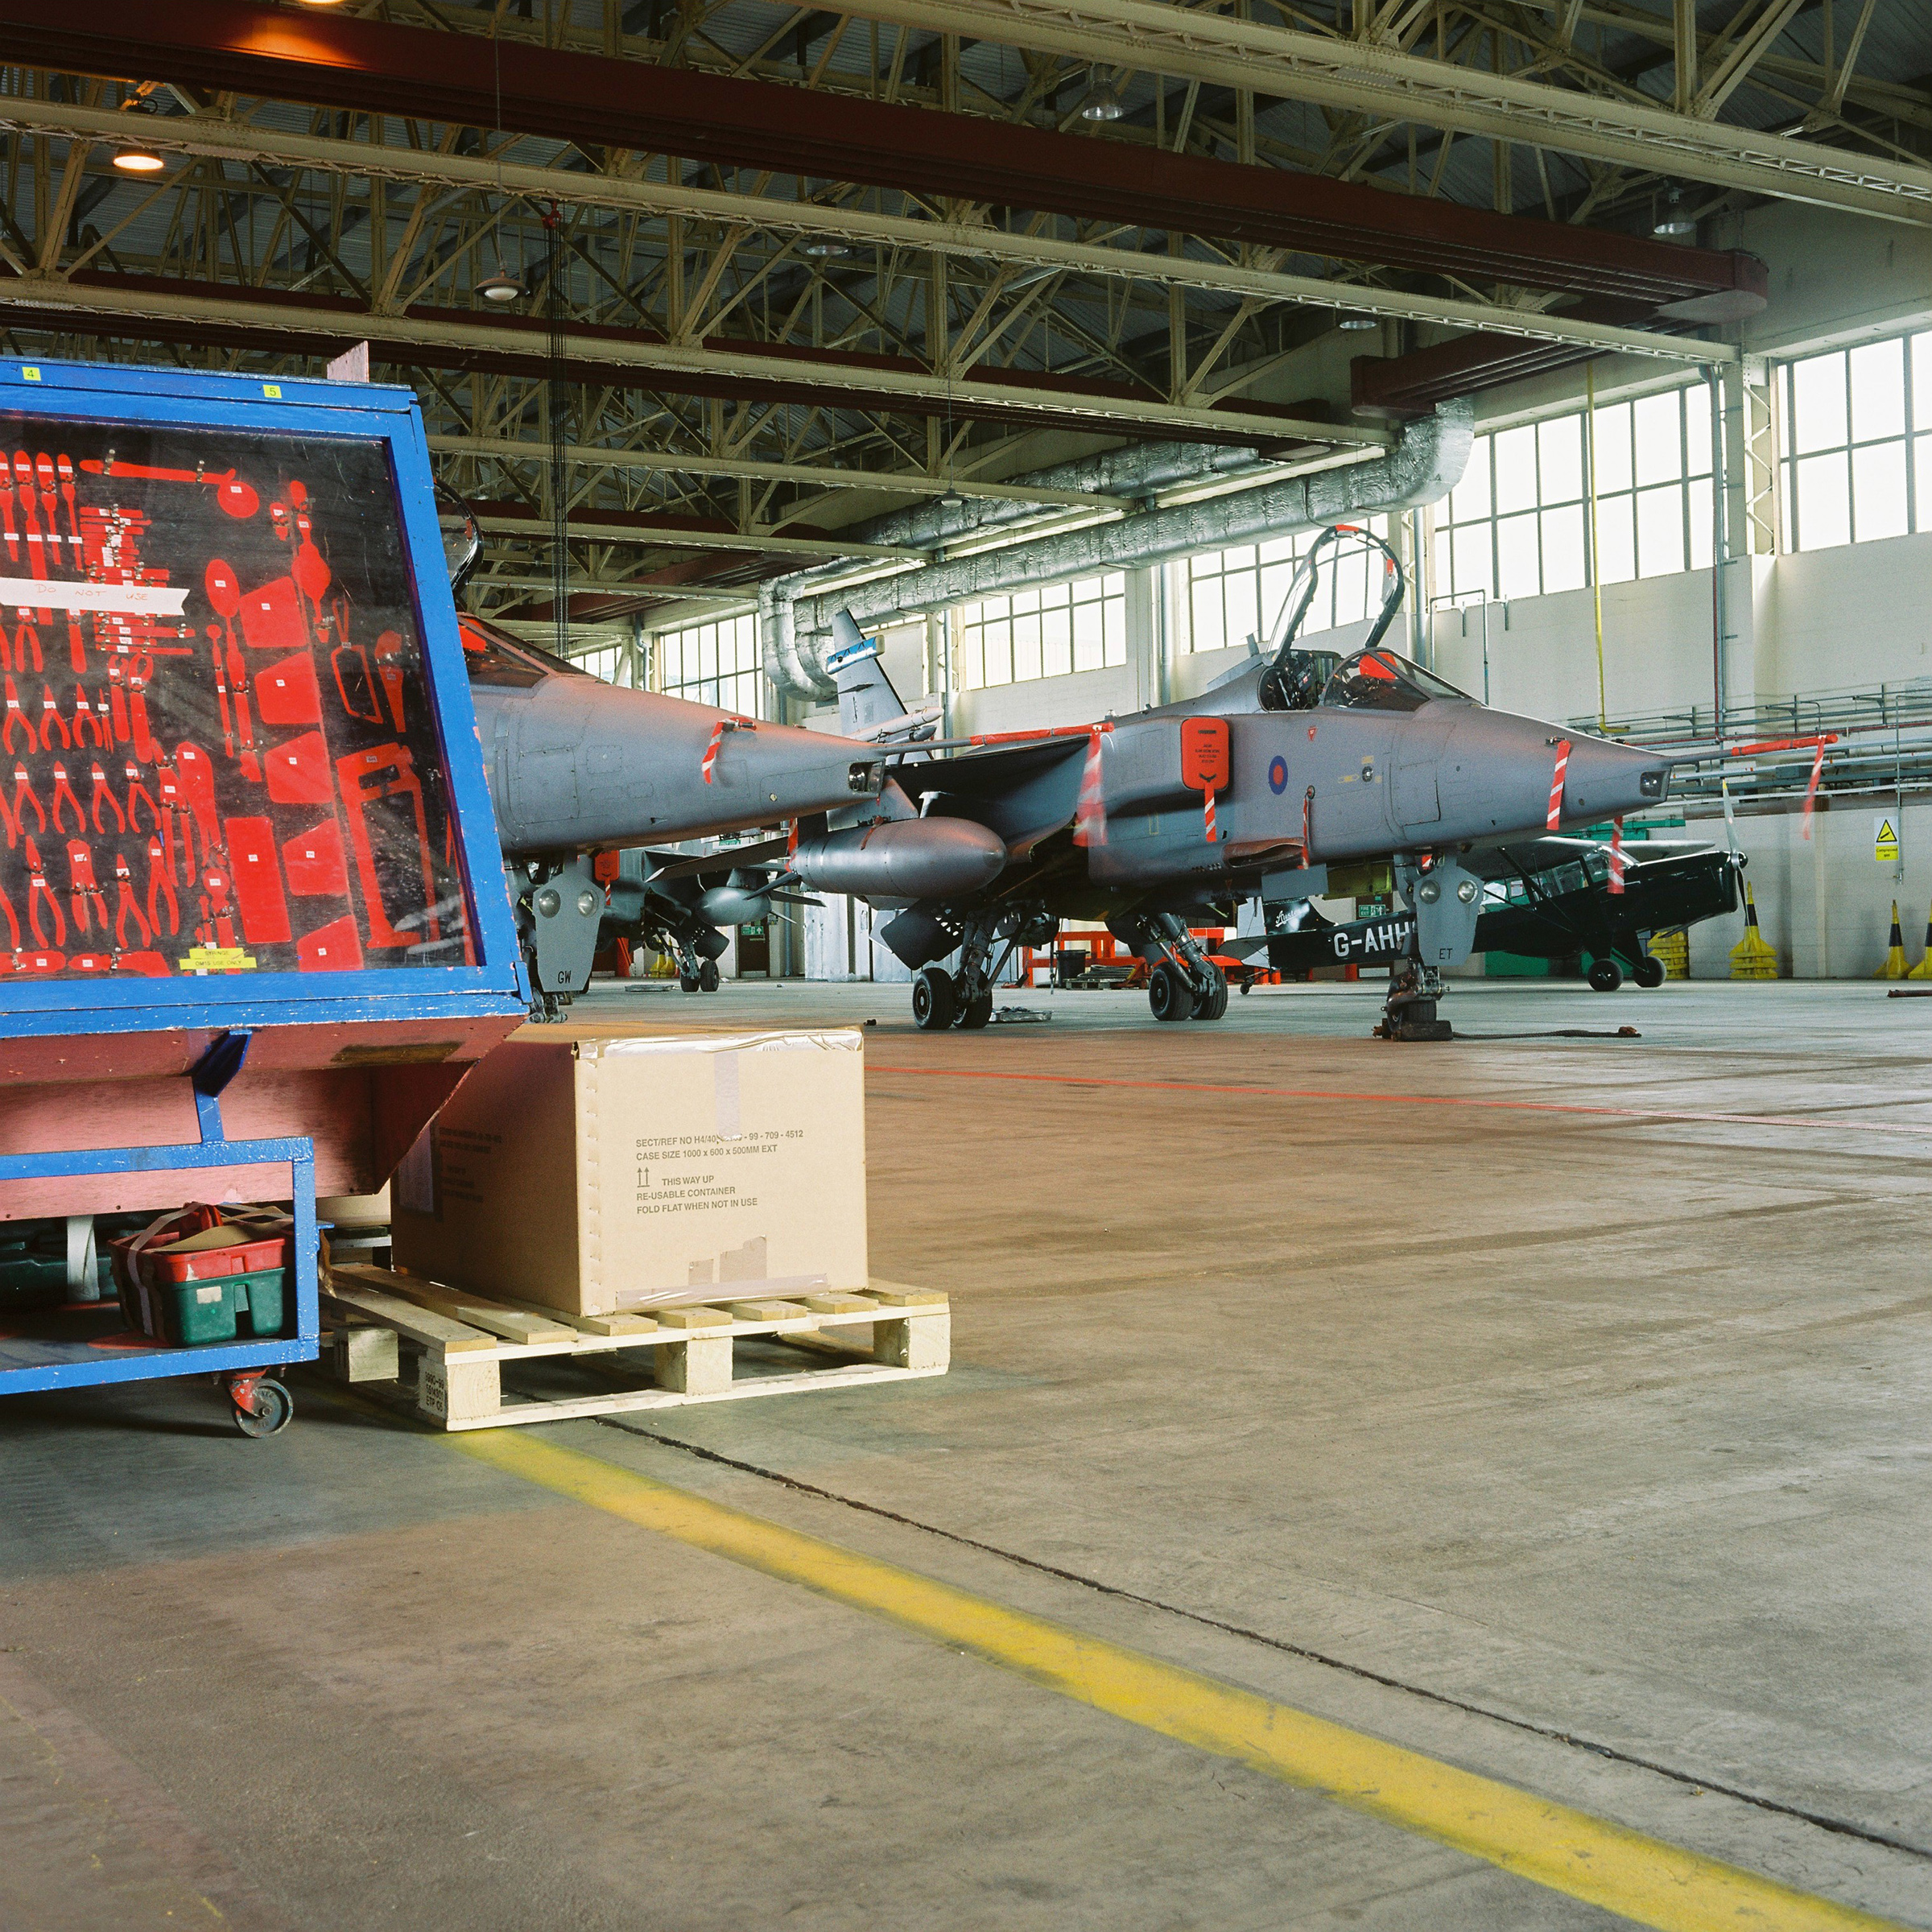 Bright red tools in large blue tool box inside an aircraft hangar with two planes